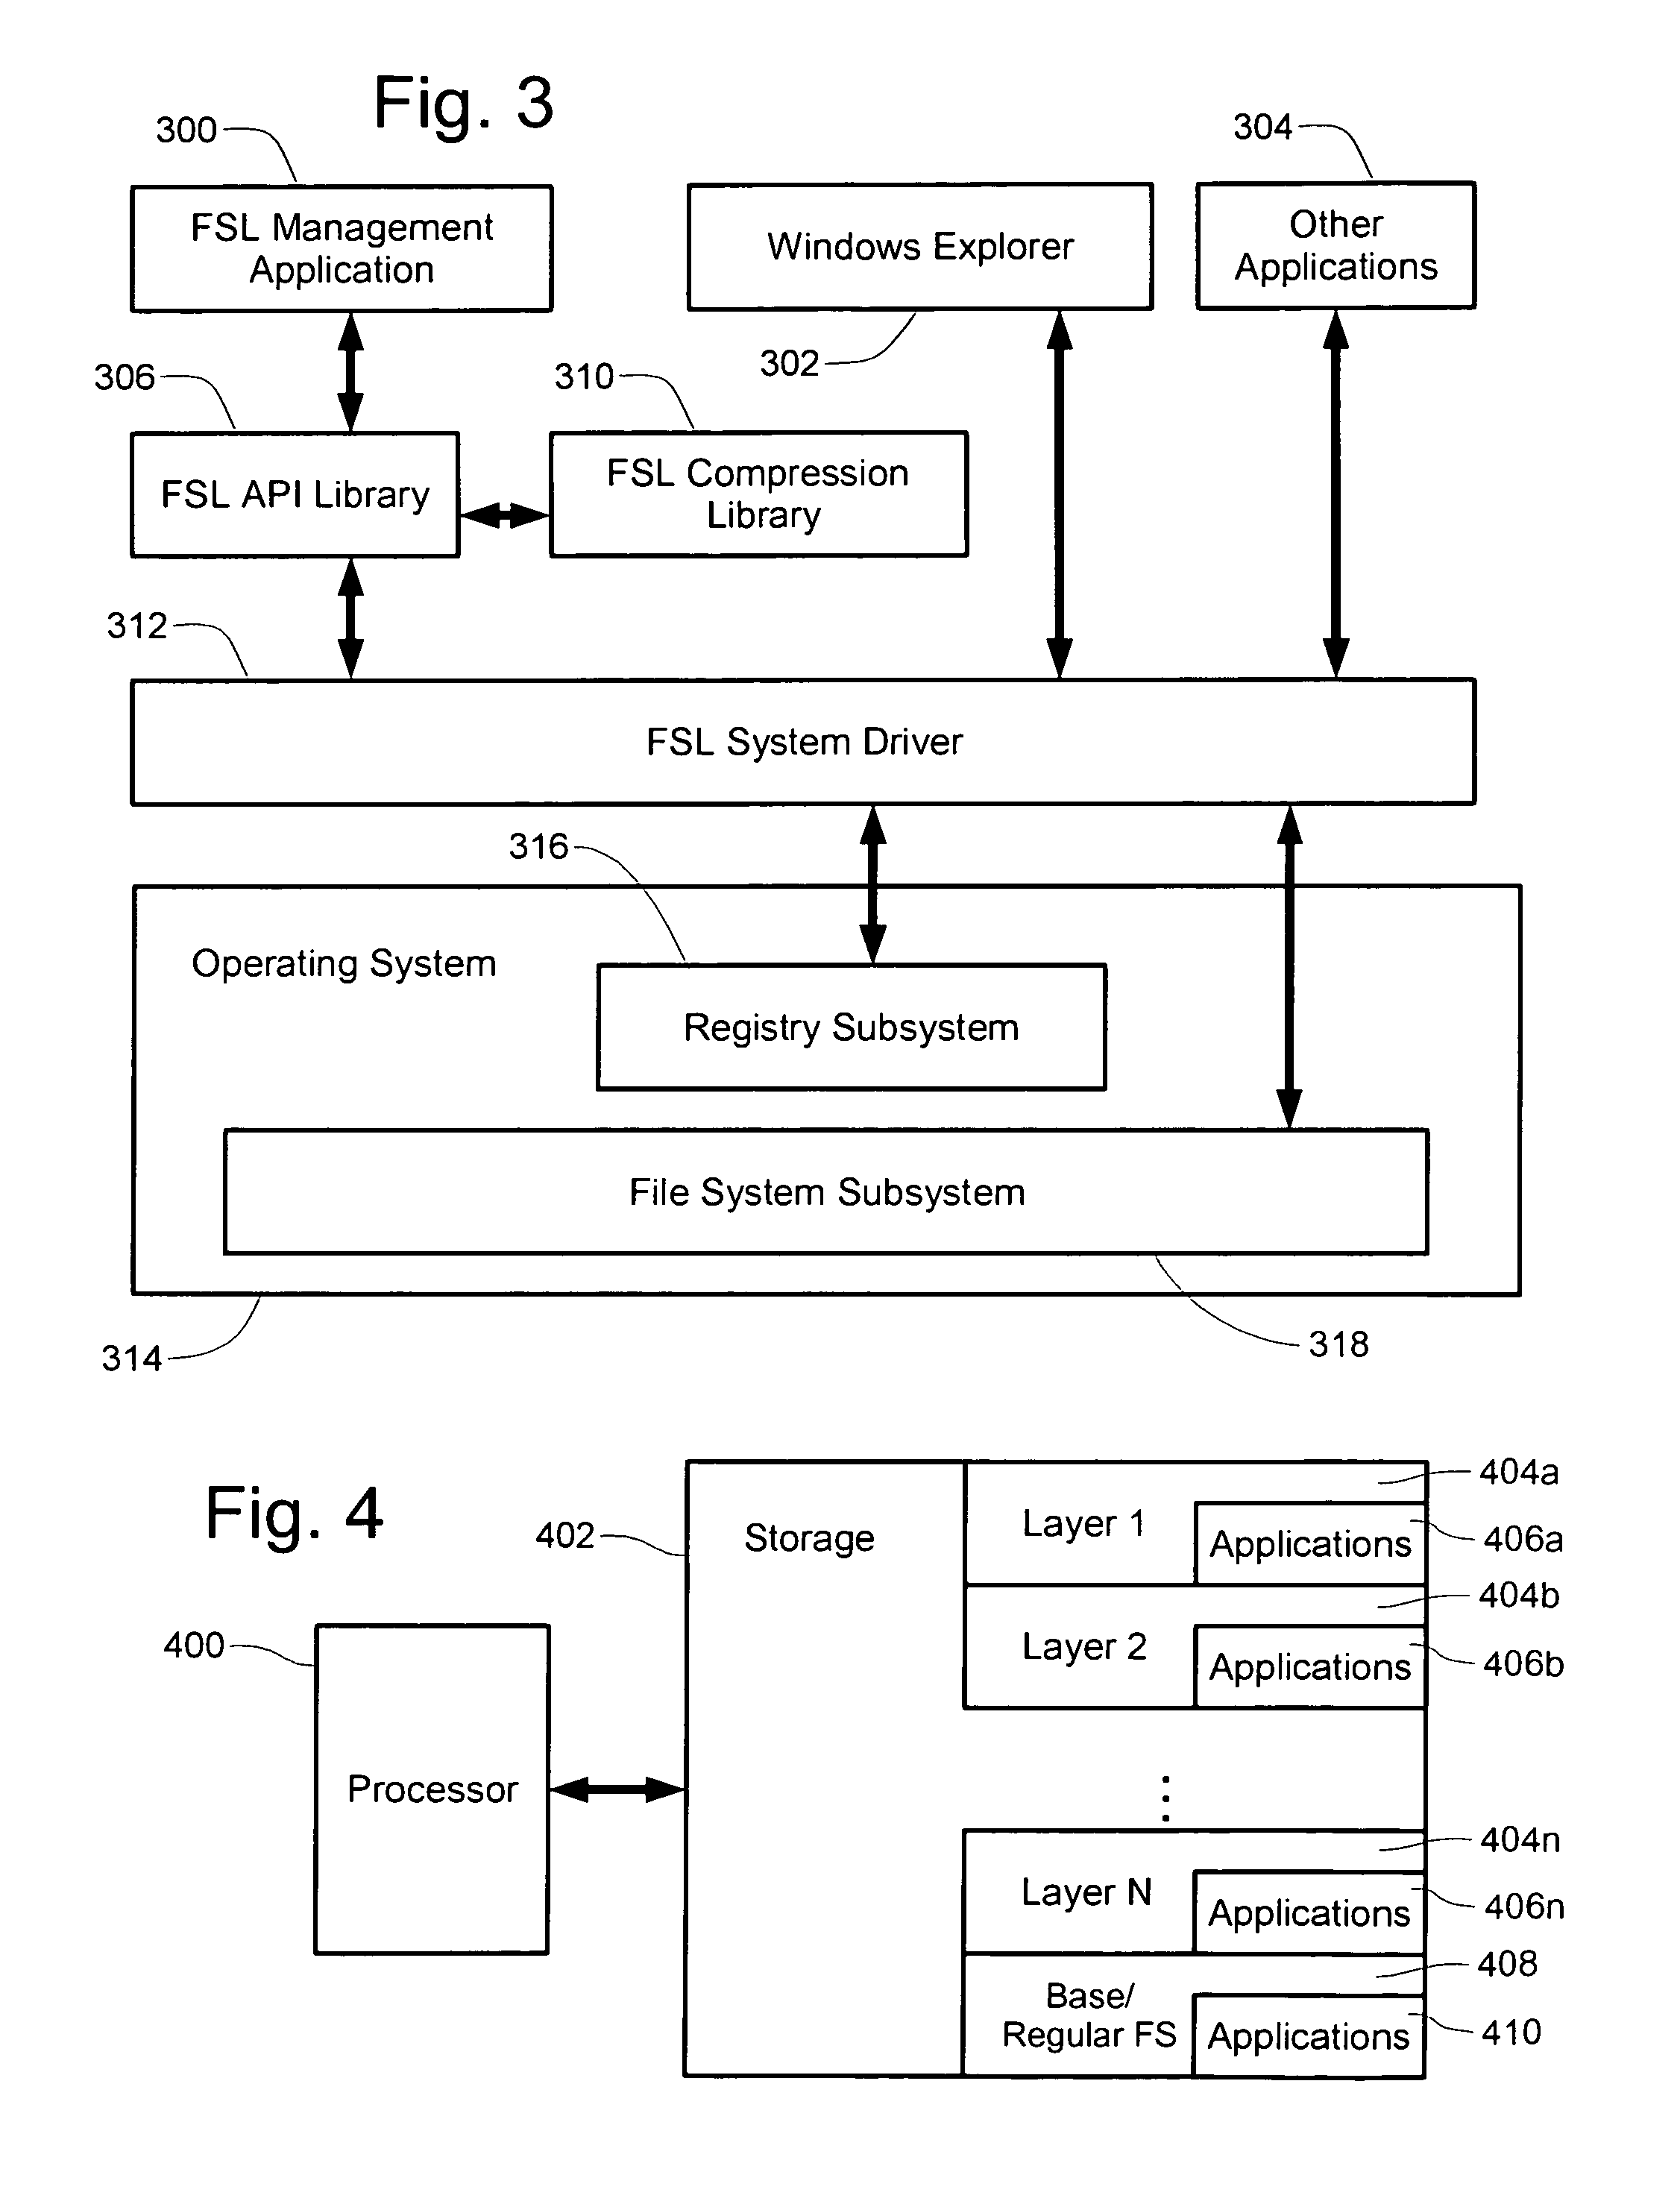 Sublayered application layered system